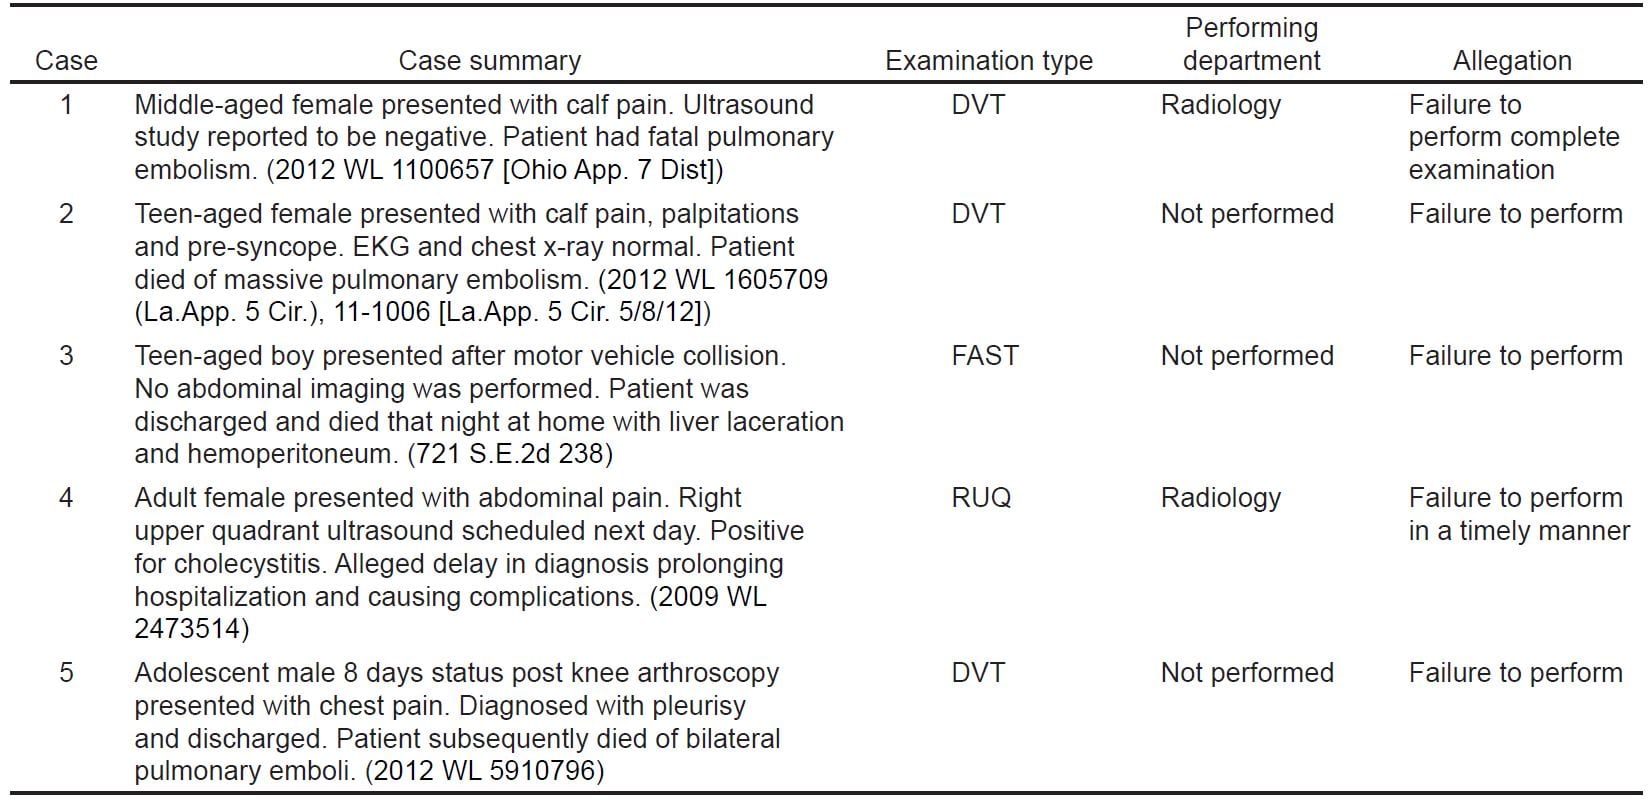 A Review of Lawsuits Related to Point-of-Care  Emergency Ultrasound Applications